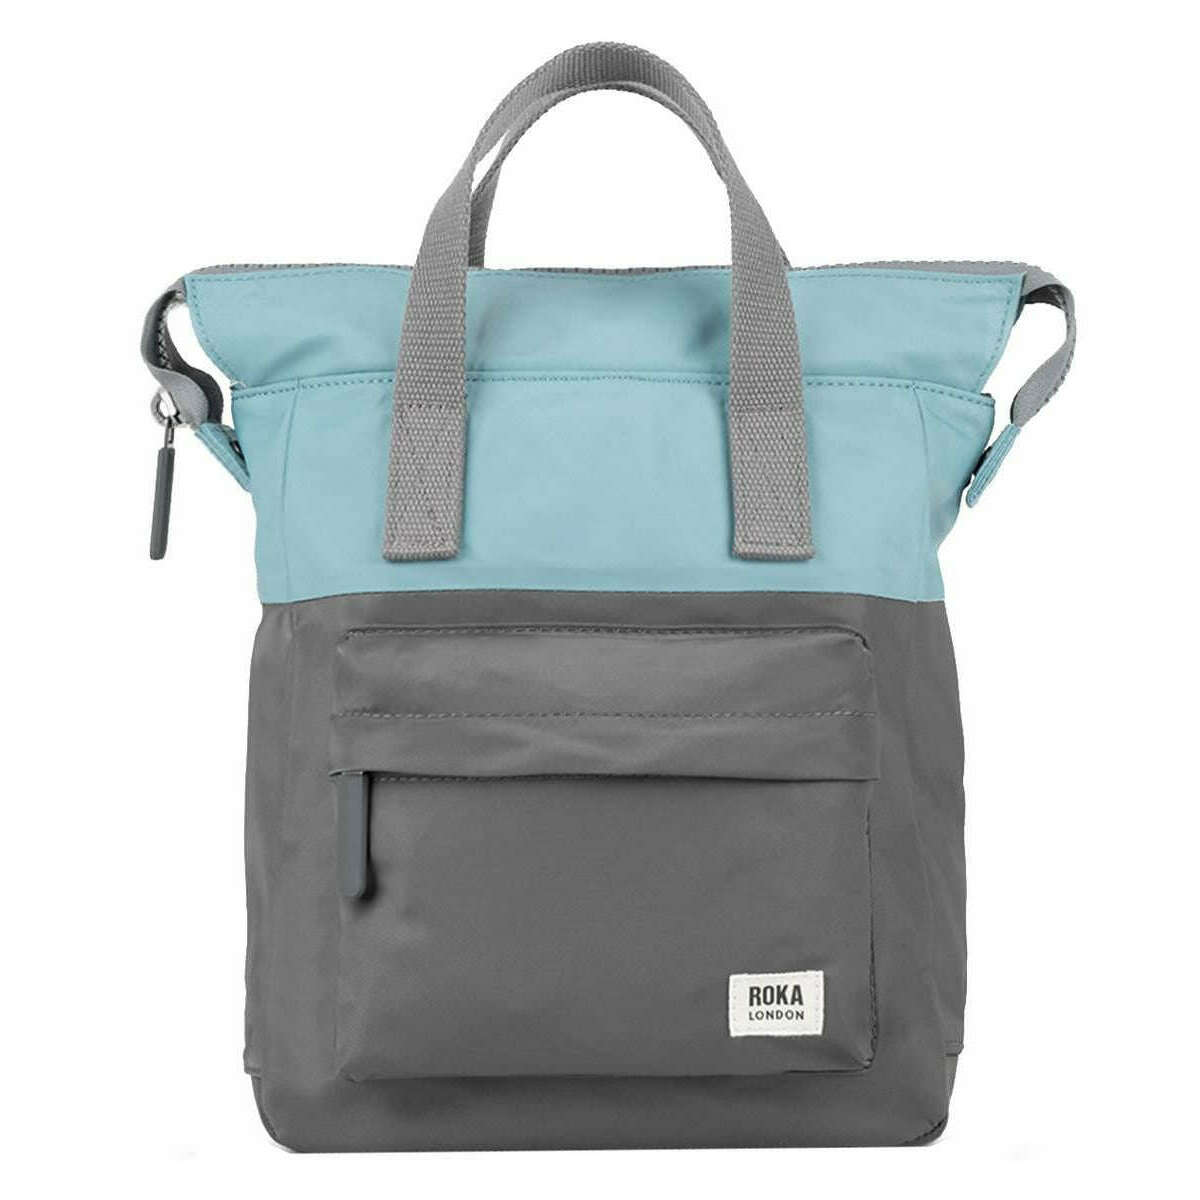 Roka Bantry B Small Creative Waste Two Tone Recycled Nylon Backpack - Graphite Grey/Spearmint Blue